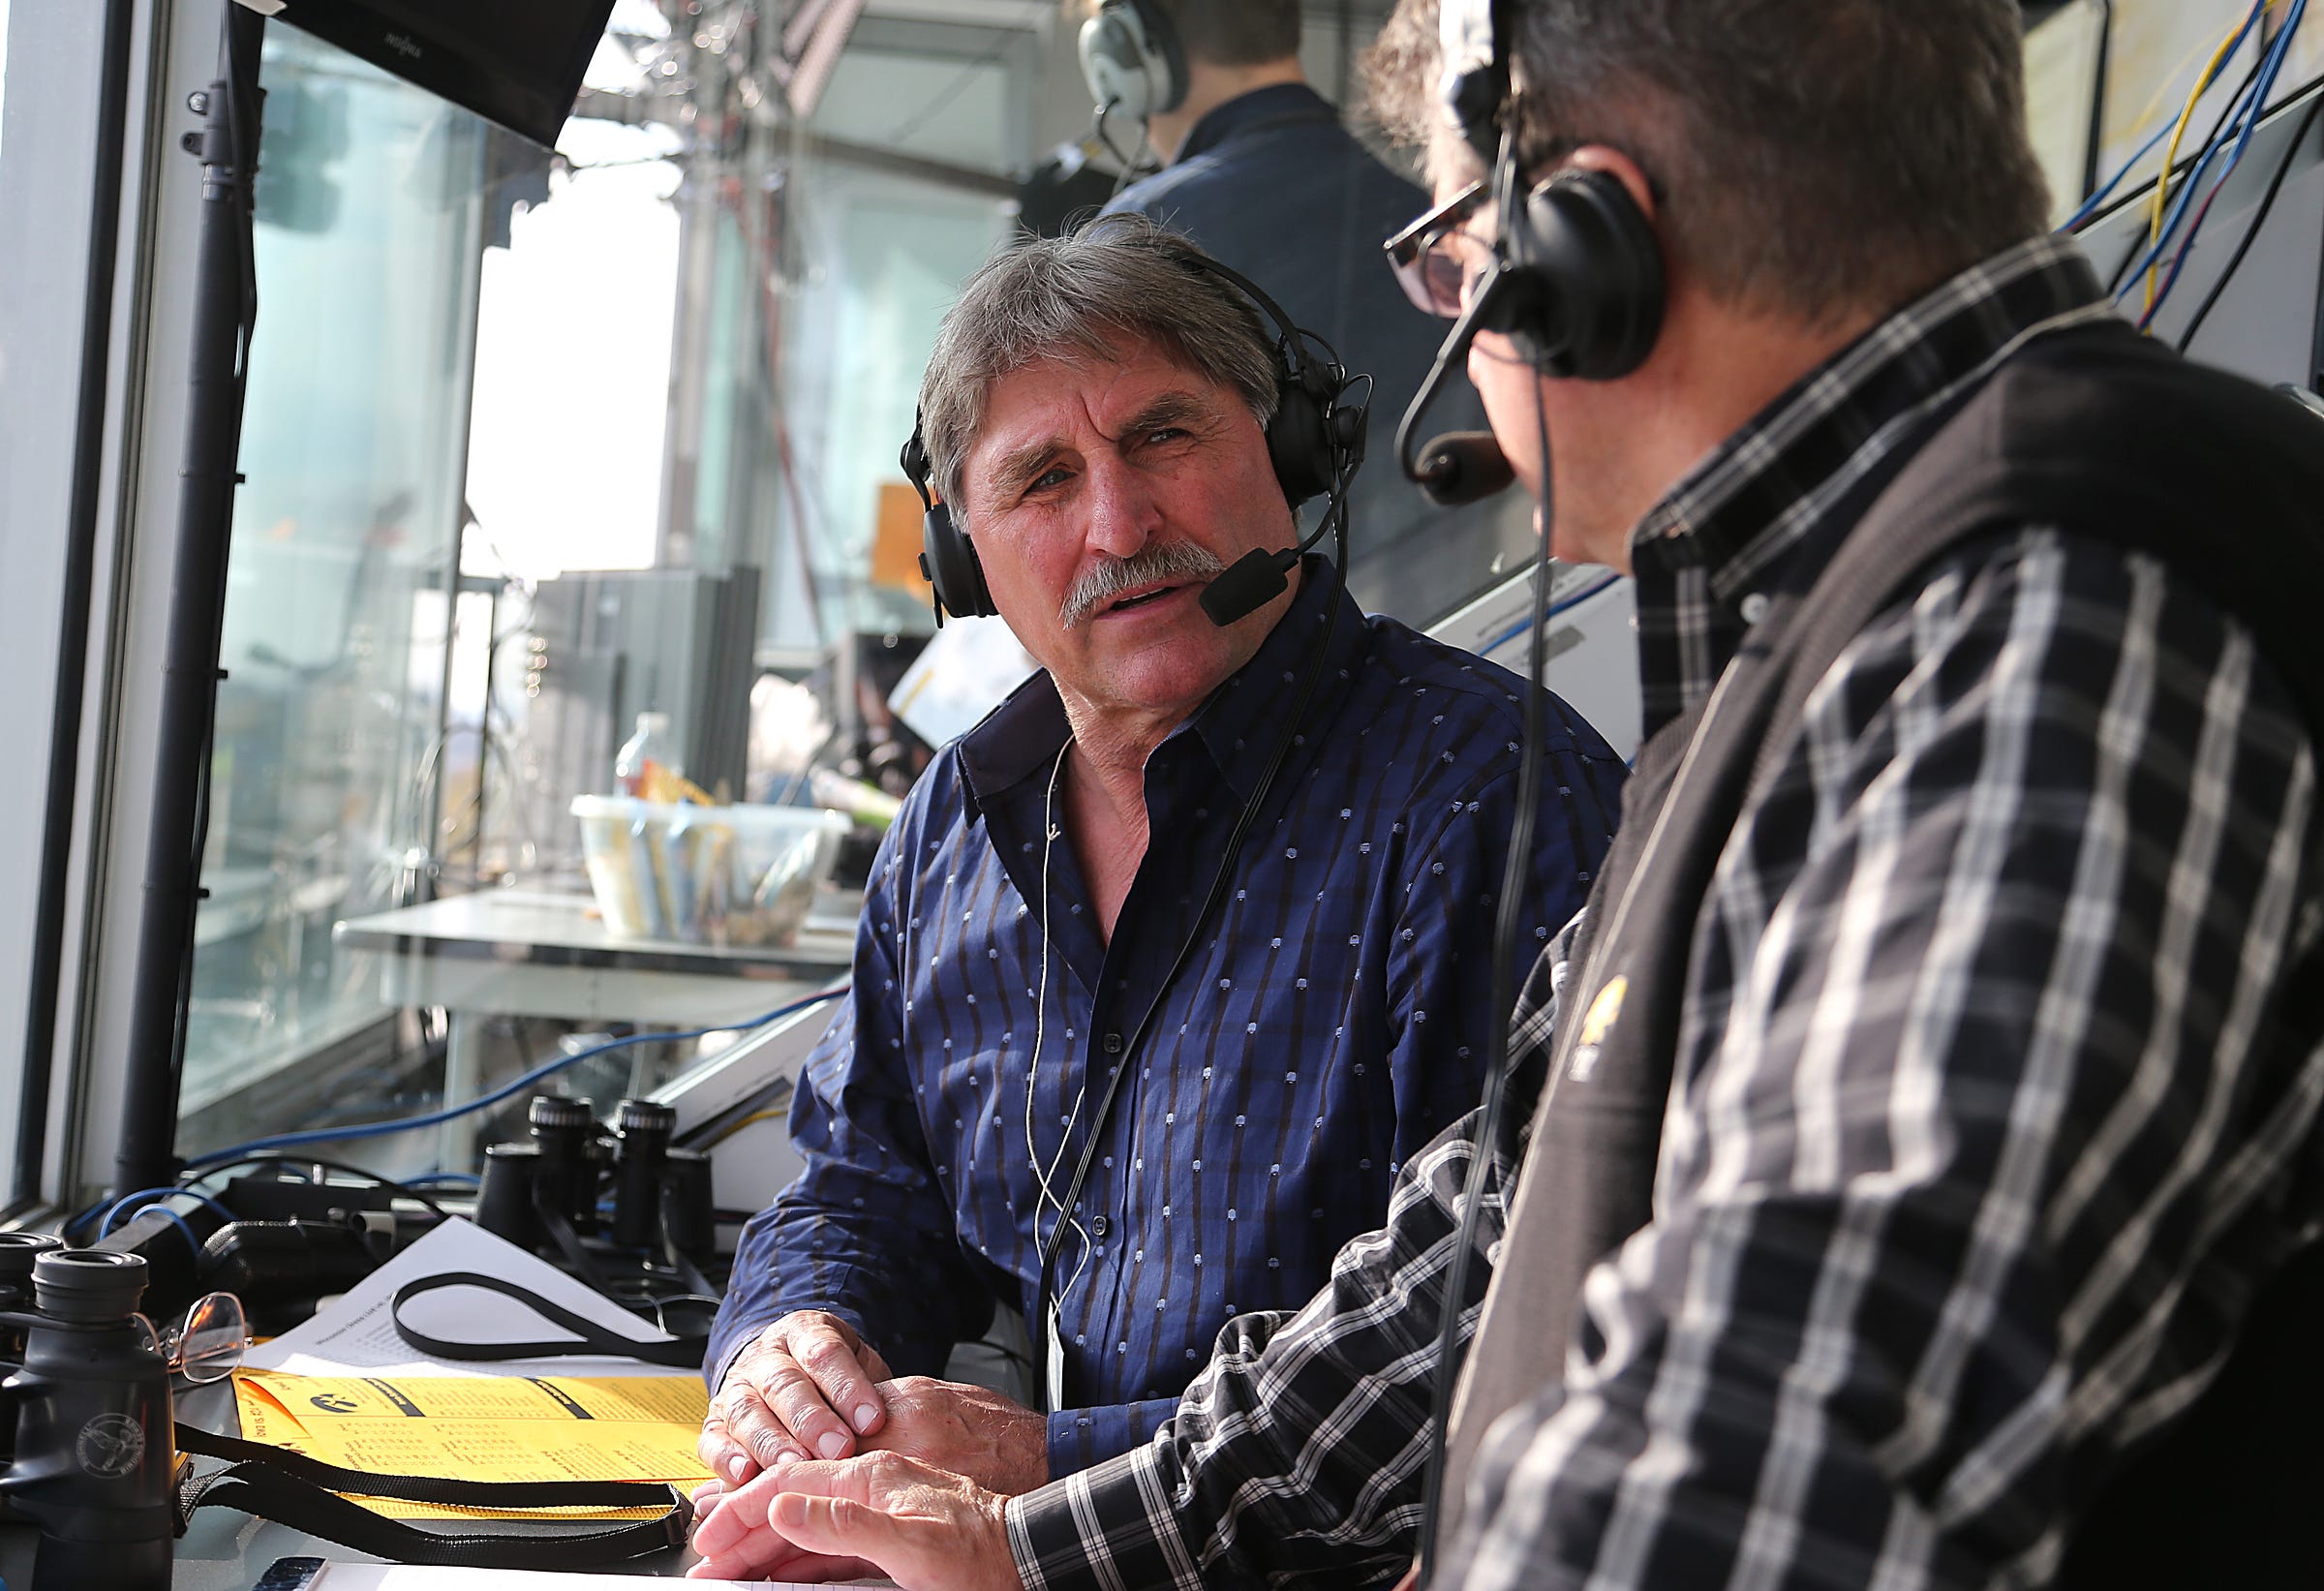 From 2013: Ed Podolak, left, talks with Iowa play-by-play announcer Gary Dolphin prior to kickoff against Wisconsin in 2013.